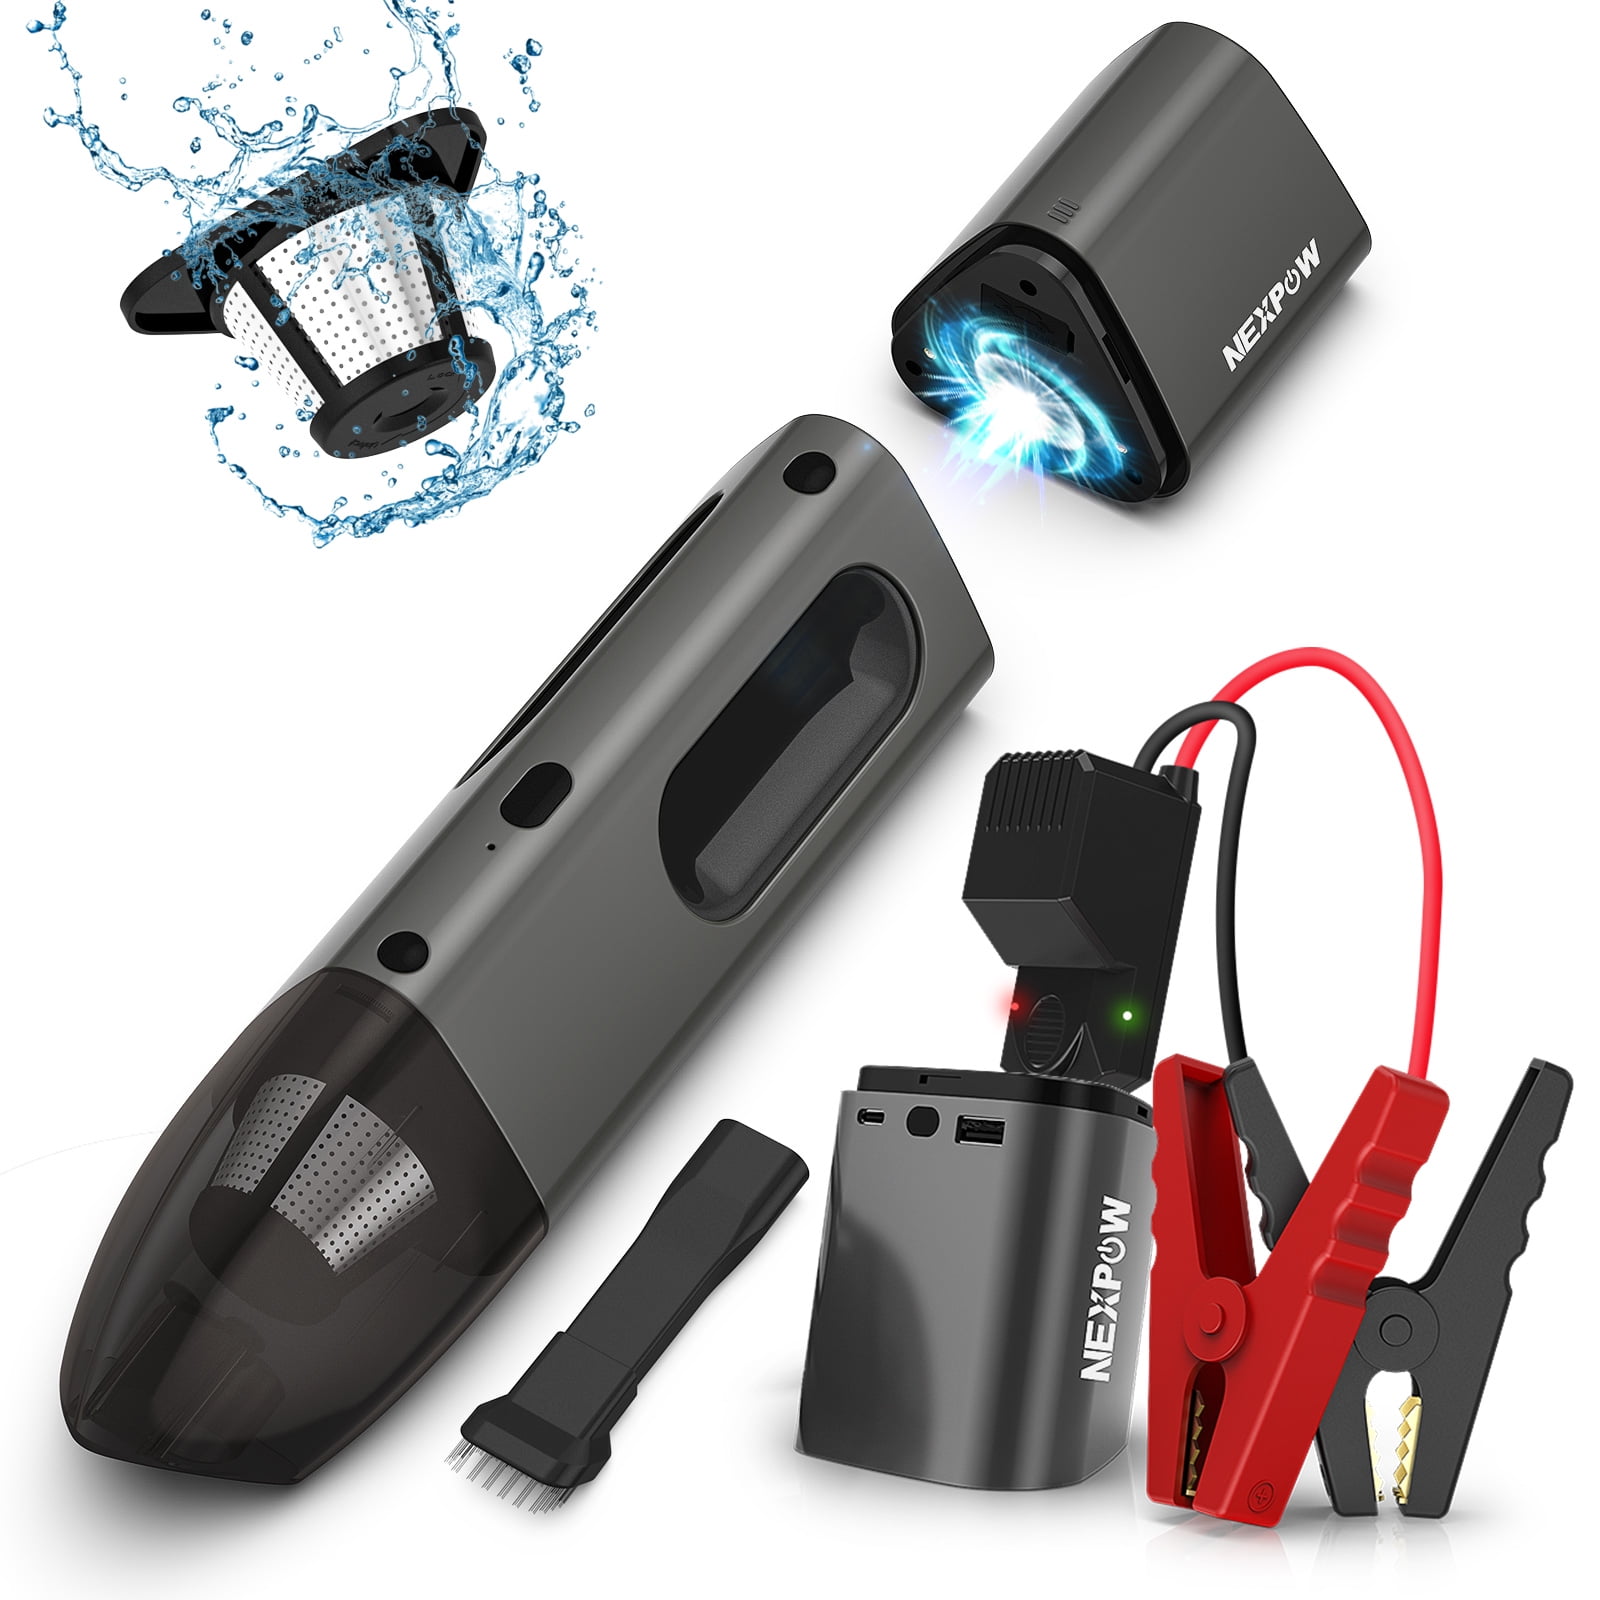 NEXPOW Jump Starter w/ Car Vacuum Cleaner $49.99 + Free Shipping